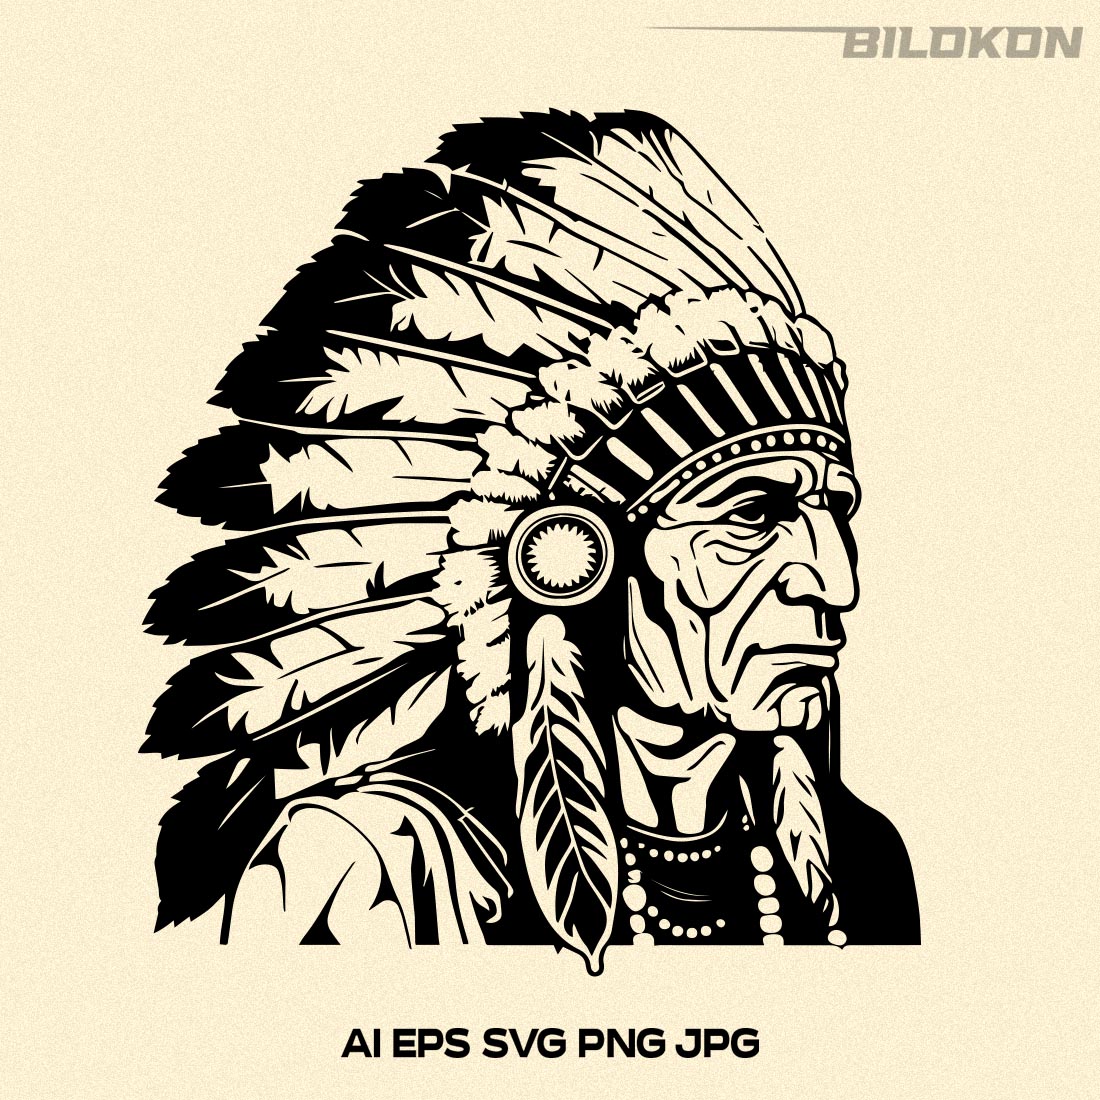 American Indian SVG, Native American, Indian logo SVG Vector cover image.